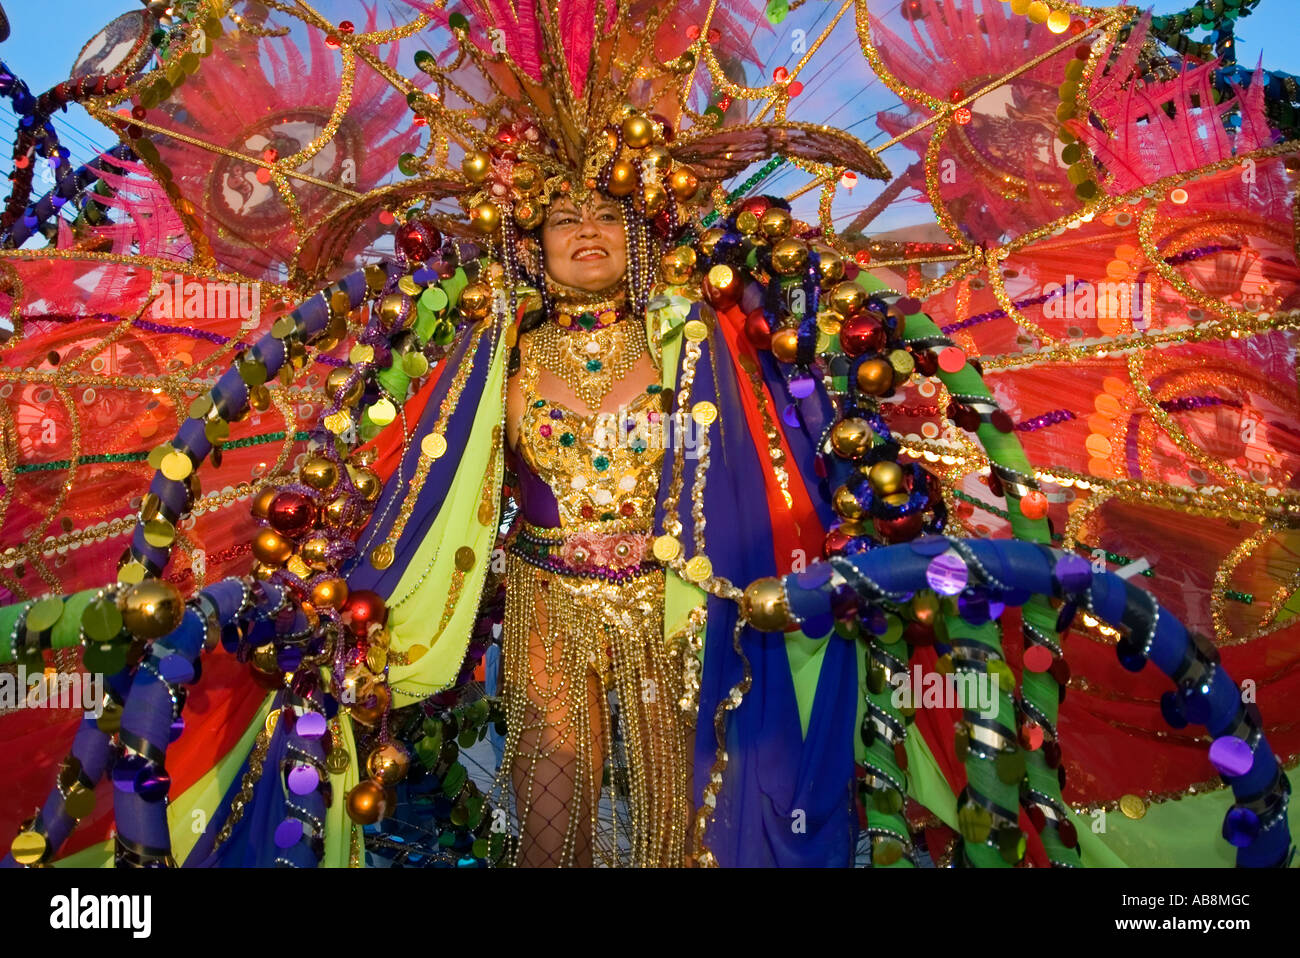 West Indies Port of Spain Trinidad Carnival Portrait of celebrating dancer on mainstage in colorful costume. Stock Photo